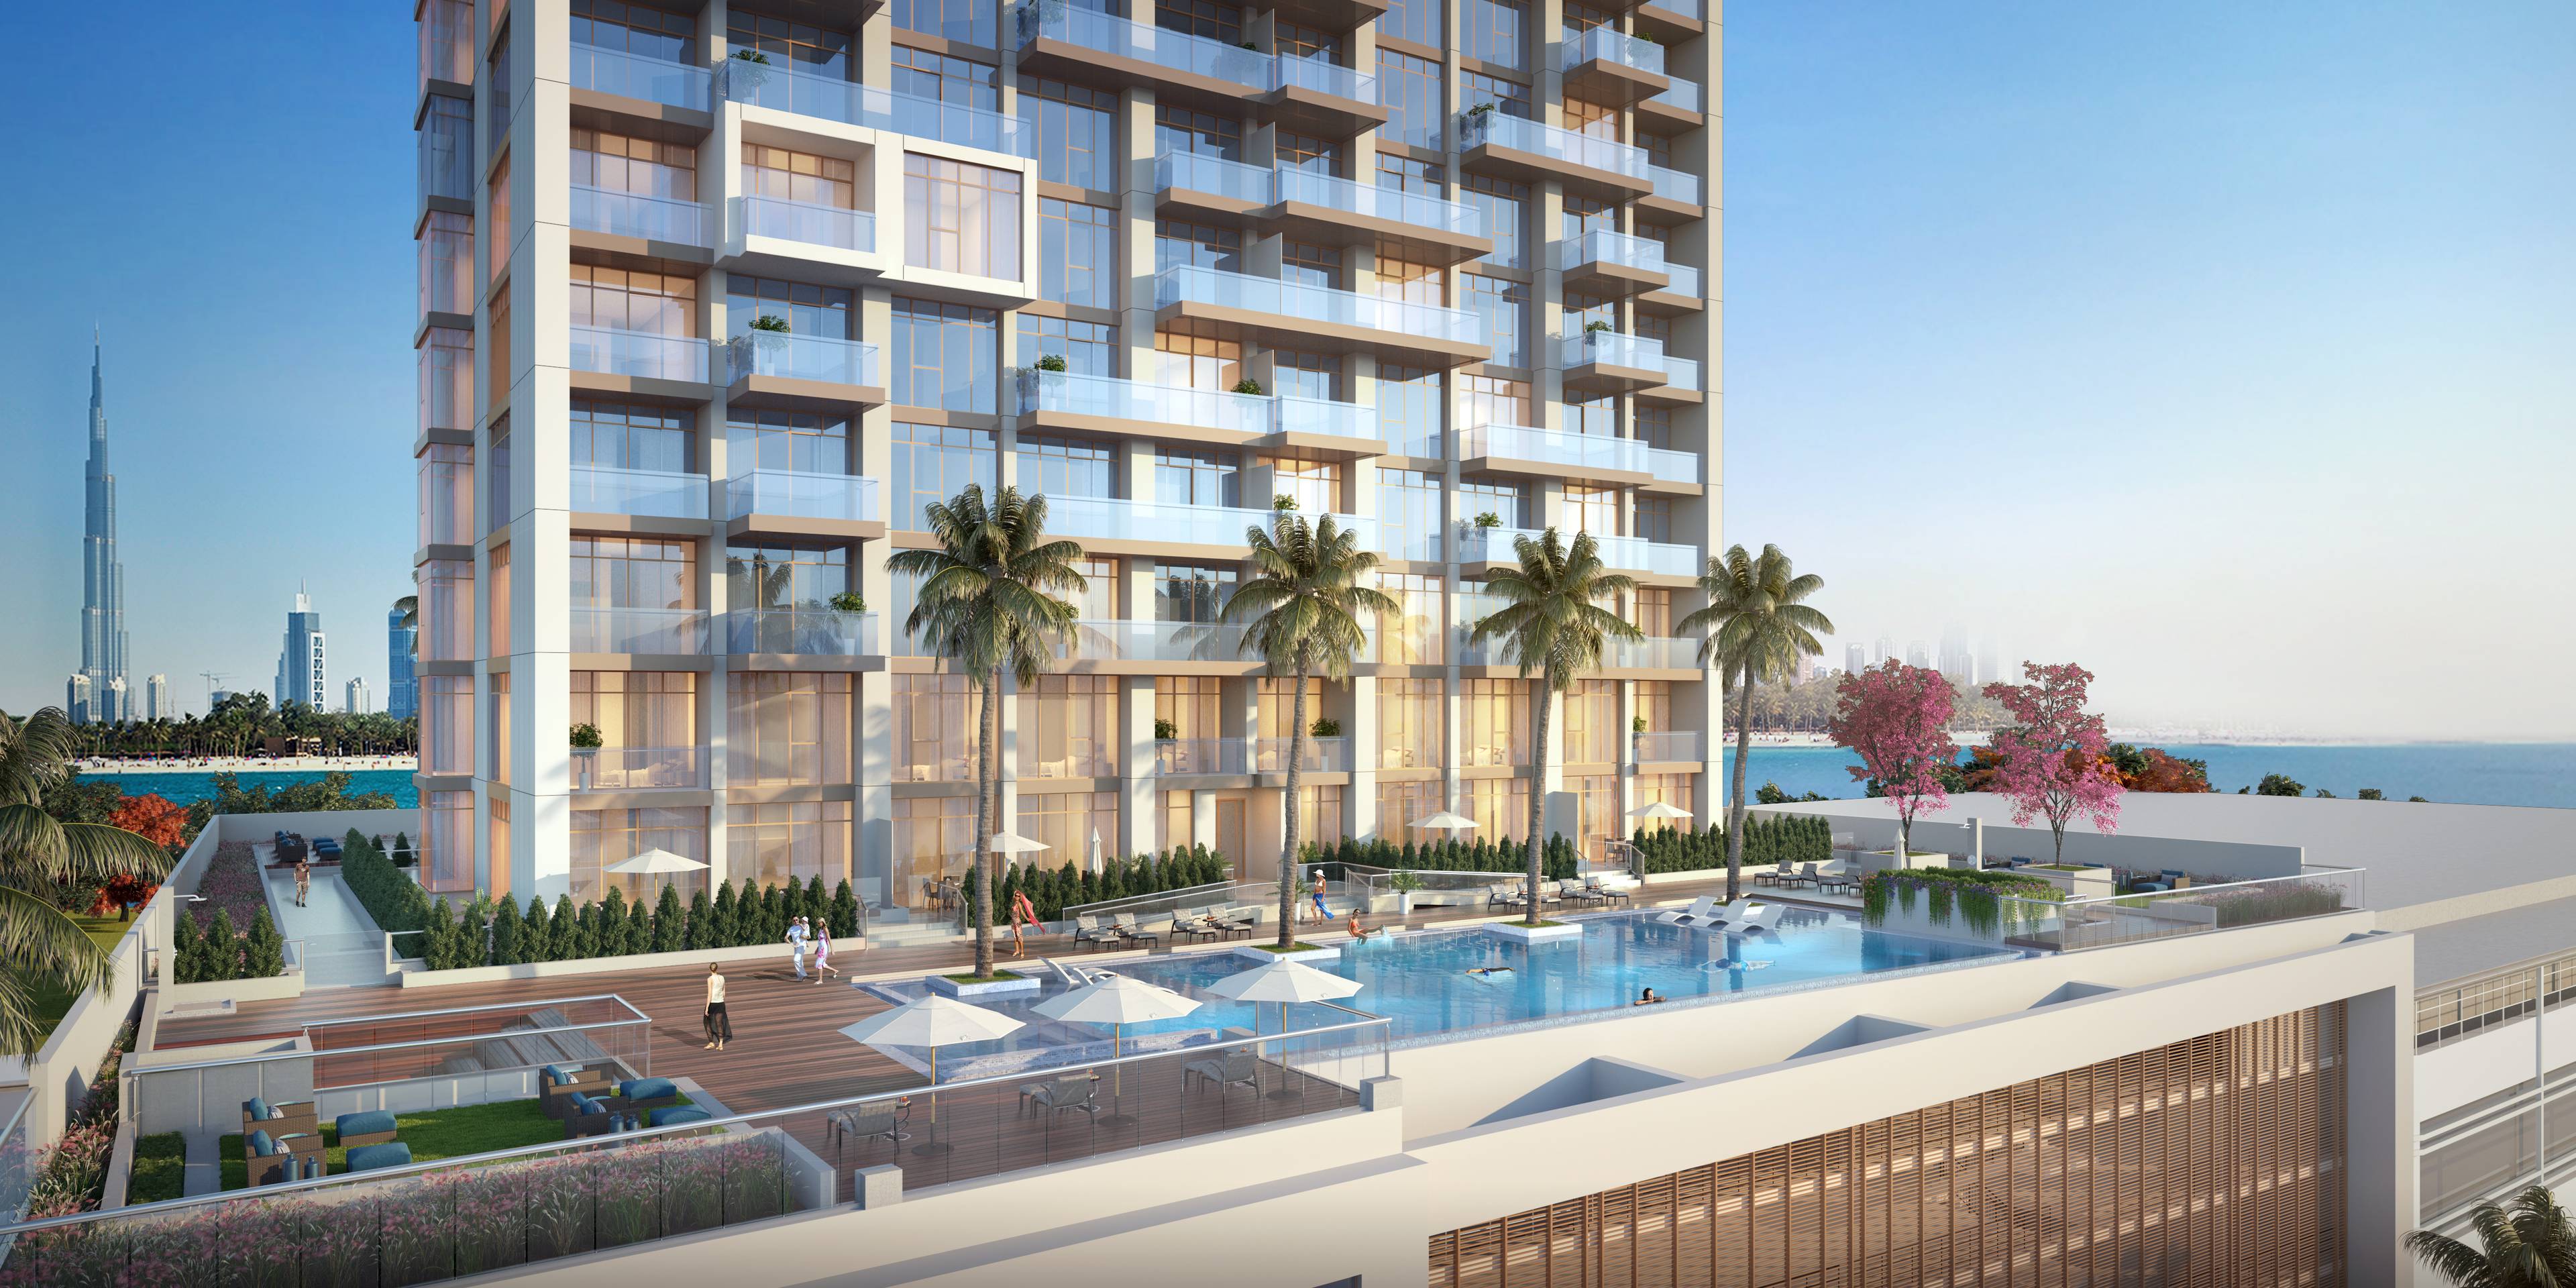 EXPERIENCE UNRIVALED LUXURY IN A 4-BEDROOM OASIS WITH PANORAMIC SEA VIEWS AT ANWA BY OMNIYAT